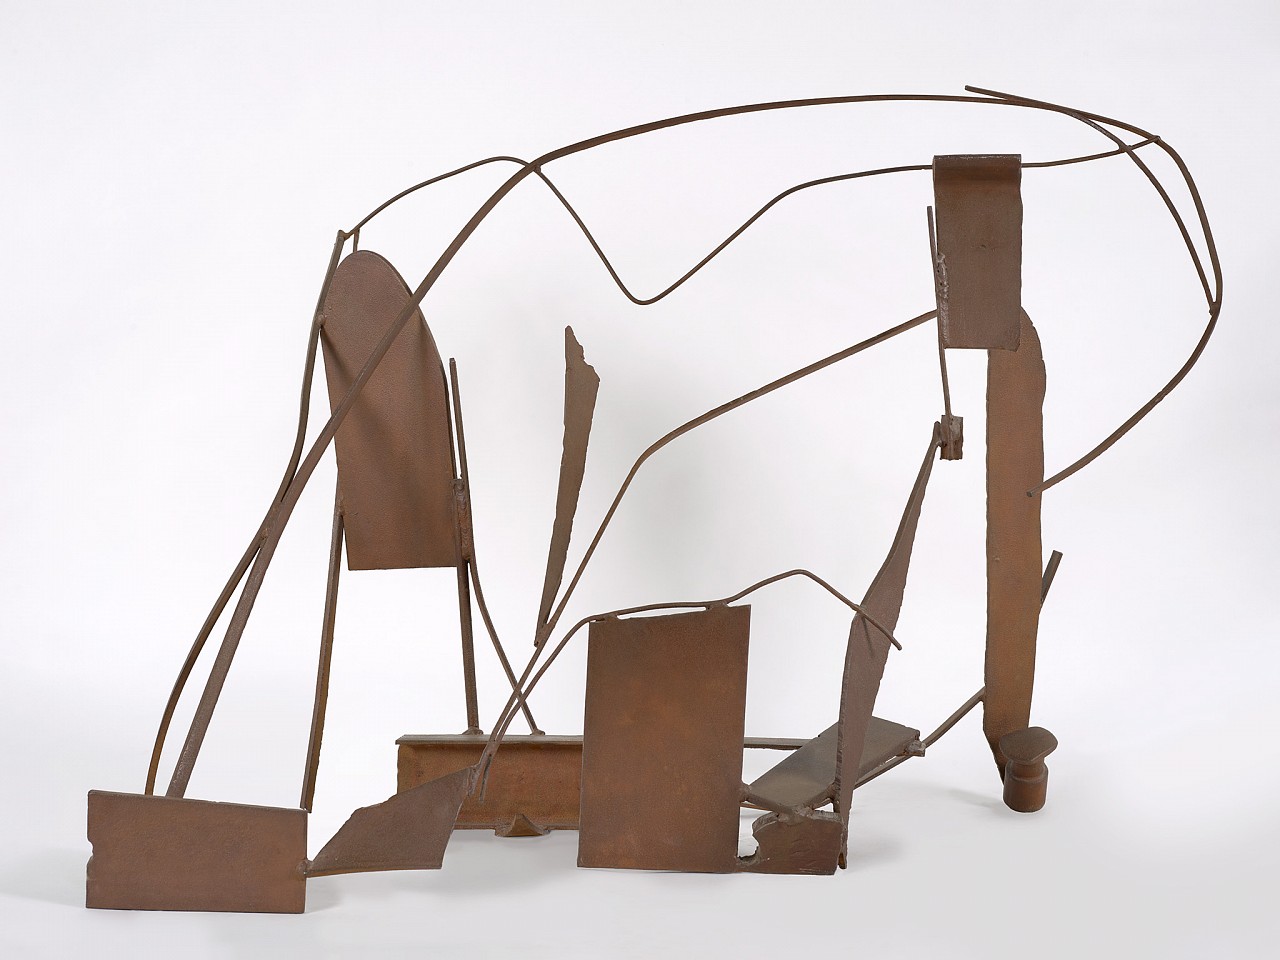 Anthony Caro, Table Piece CCCLXV, 1976 - 1977
Steel, rusted and varnished, 34 x 49 x 29 in. (86.4 x 124.5 x 73.7 cm)
CARO-00001